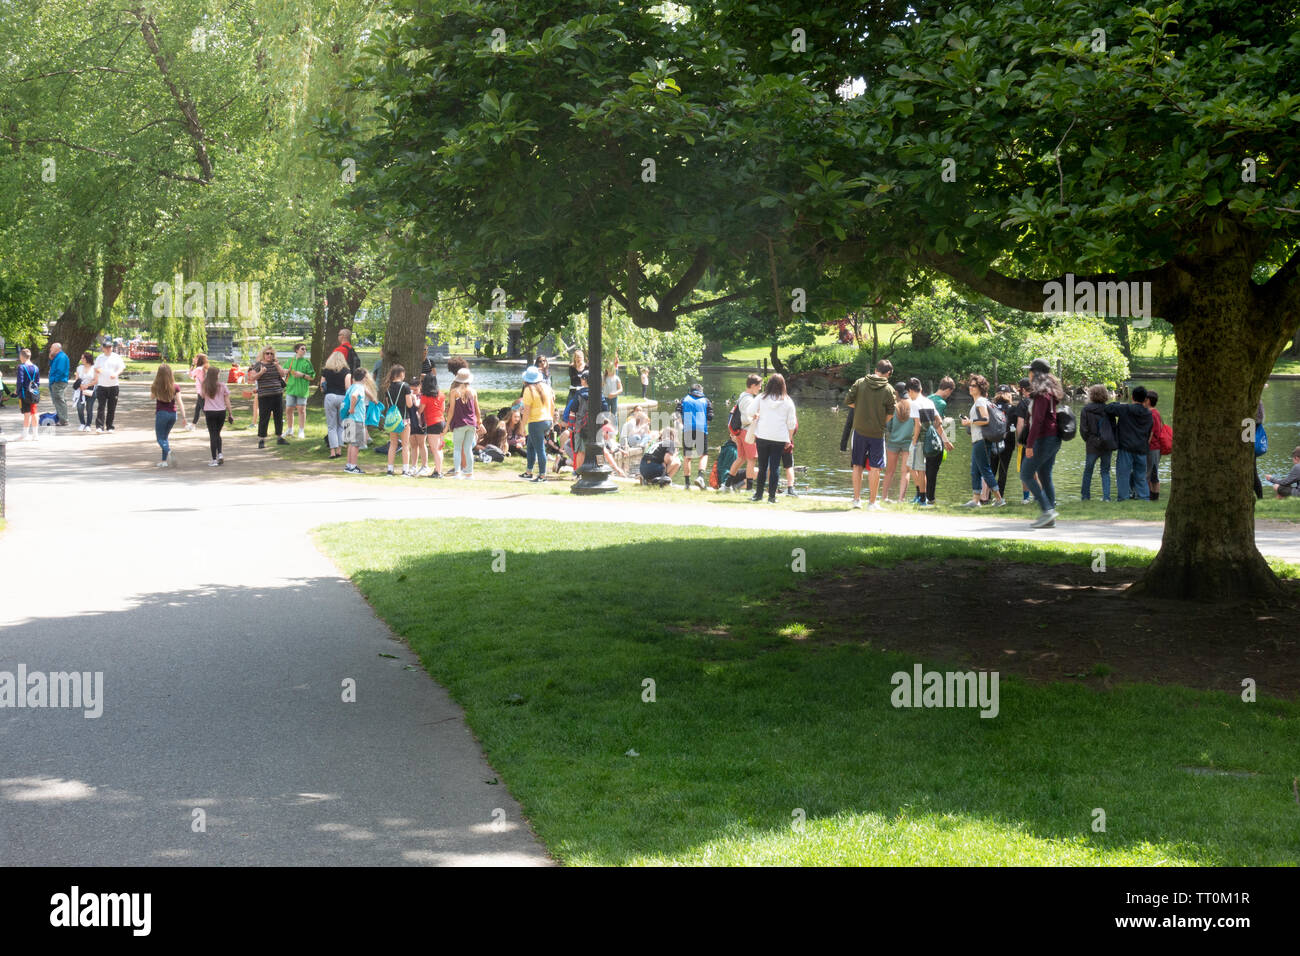 People of all age groups enjoying a bright Spring afternoon with adults and children by the Lagoon in the Boston Public Garden Massachusetts Stock Photo